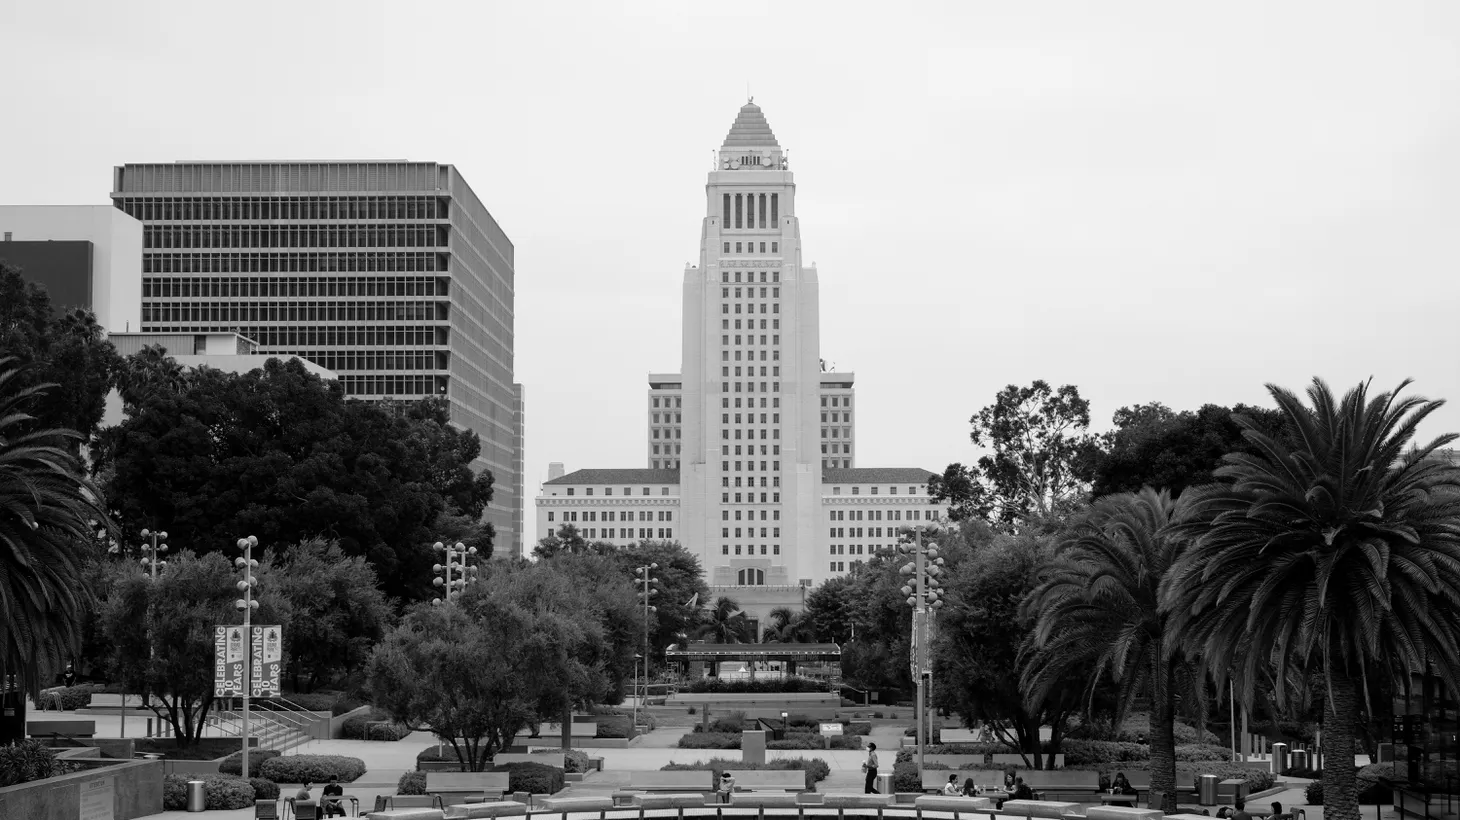 LA City Hall is seen from Grand Park, October 14, 2022. “The fight for political control in the country's second-largest city should be a story. [The] history of racial tensions and racial injustice in Los Angeles is long and profound and deeply painful,” says León Krauze, national news anchor for Univision.